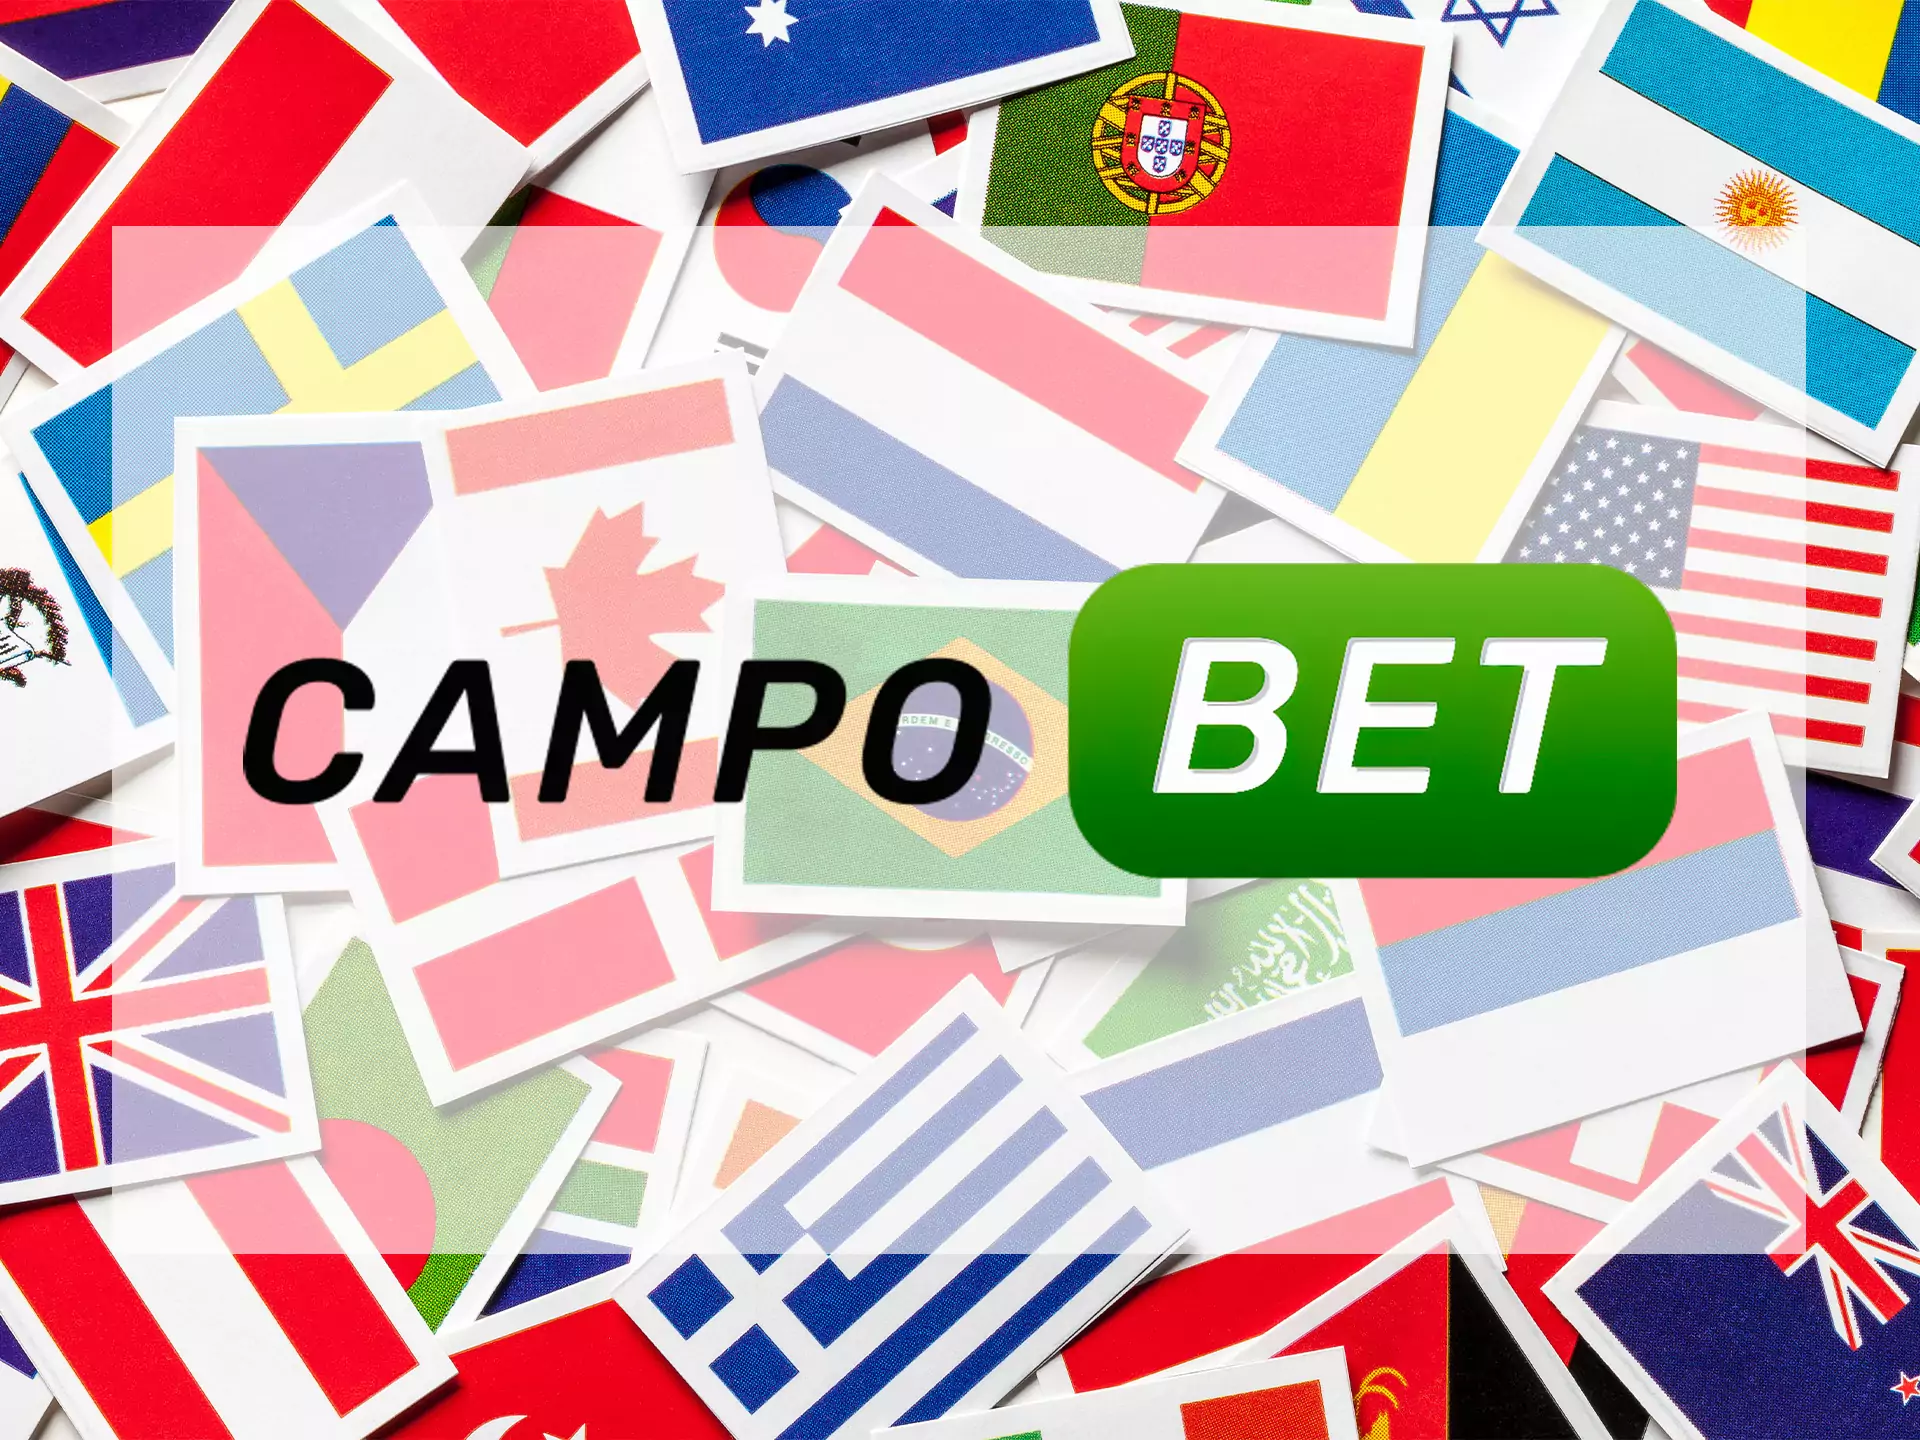 Campobet is available for betting in many countries.